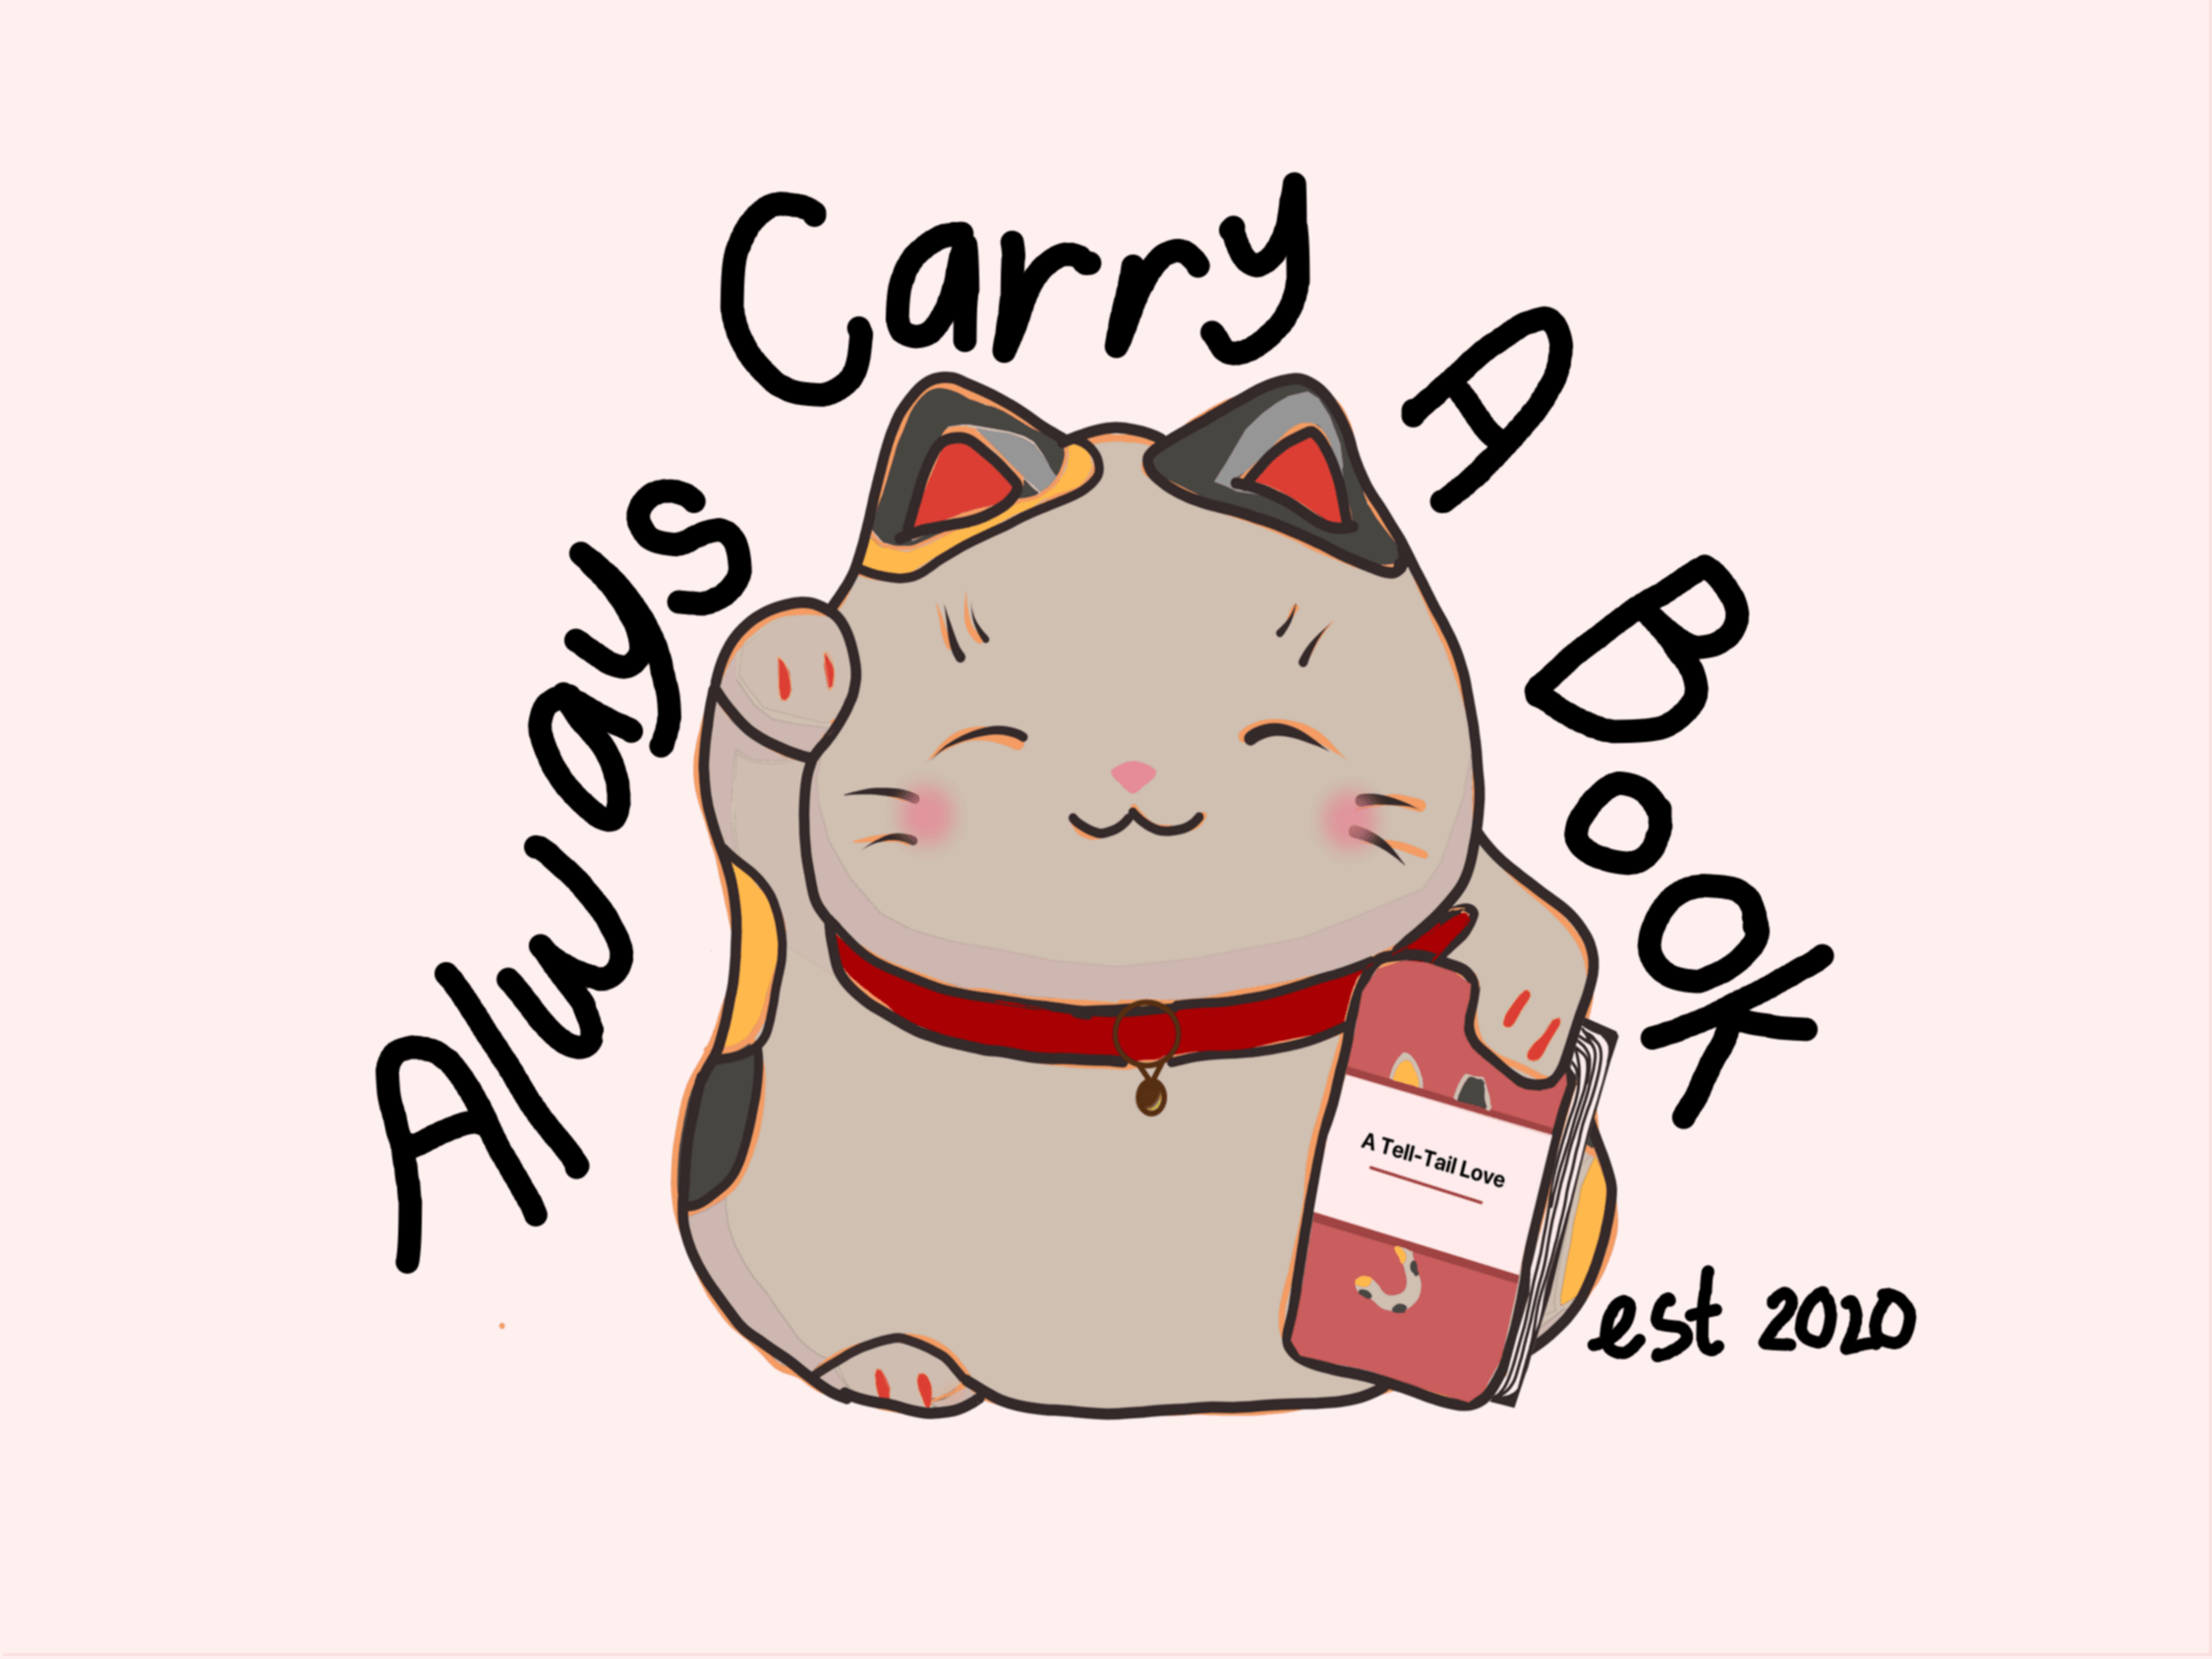 Always Carry A Book!